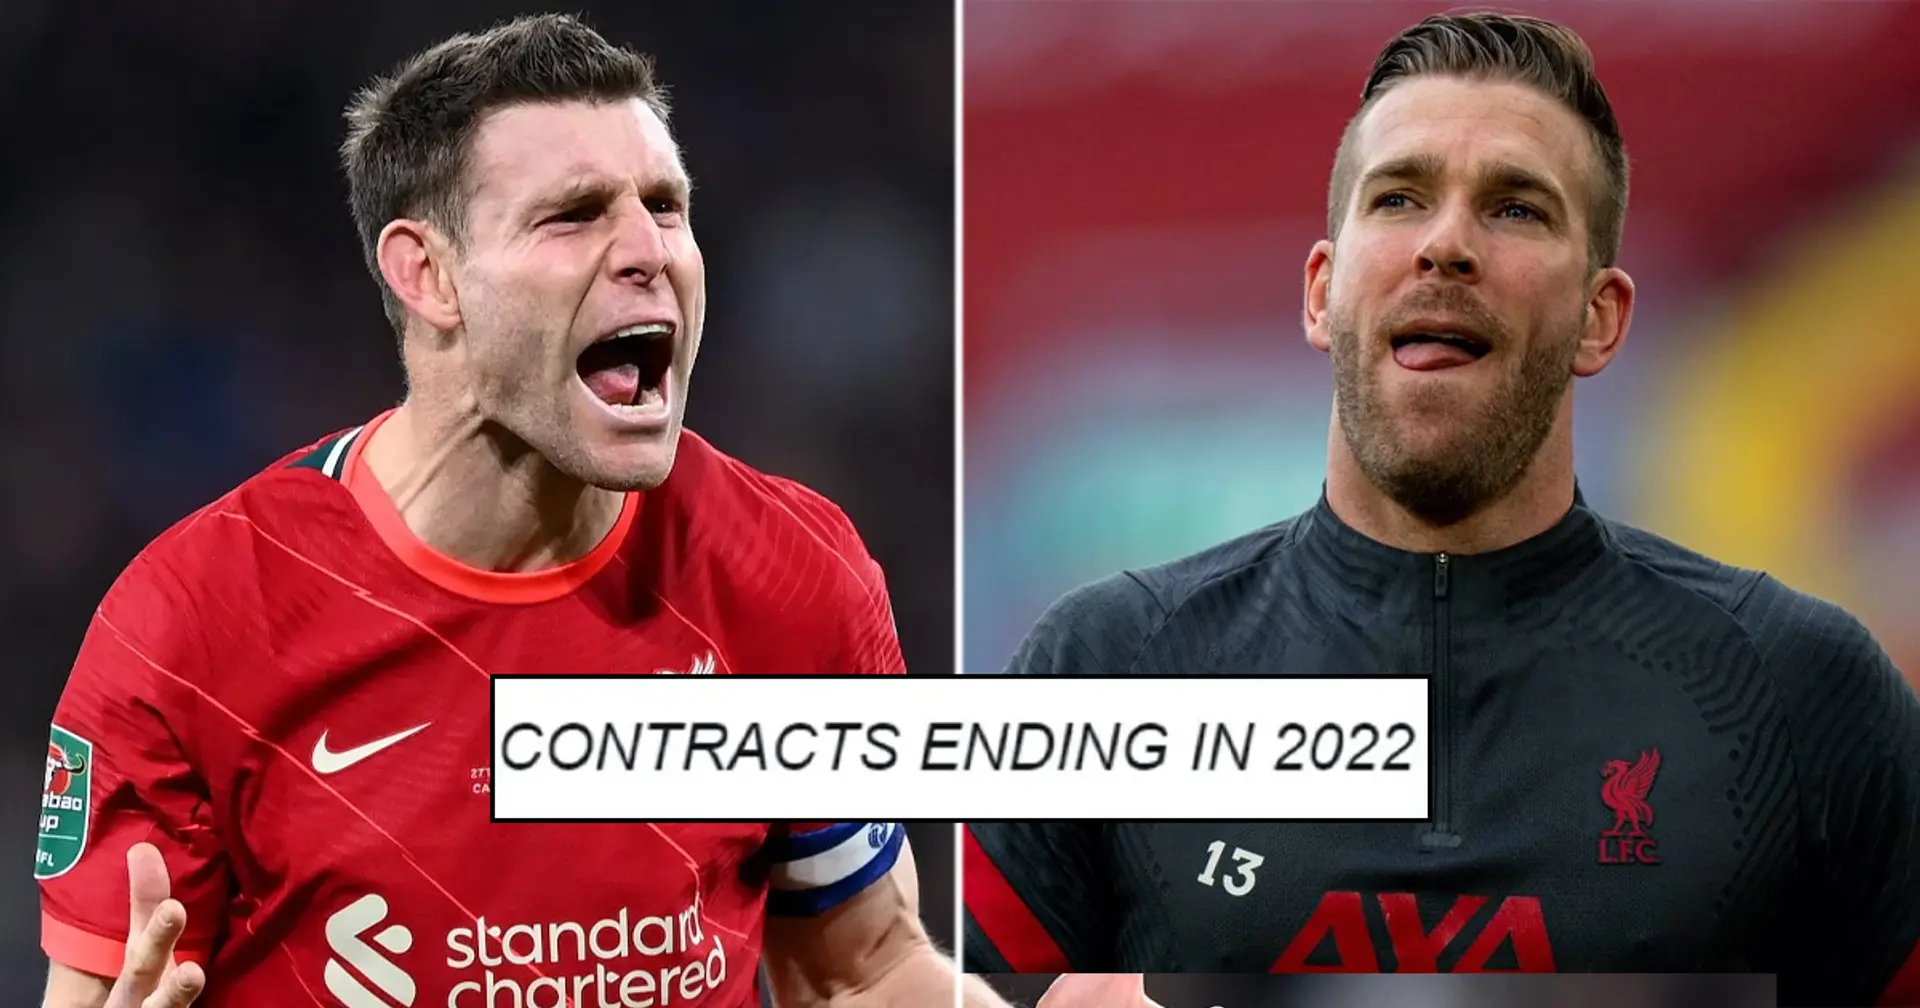 4 players could leave Liverpool as free agents this summer: latest contract round-up